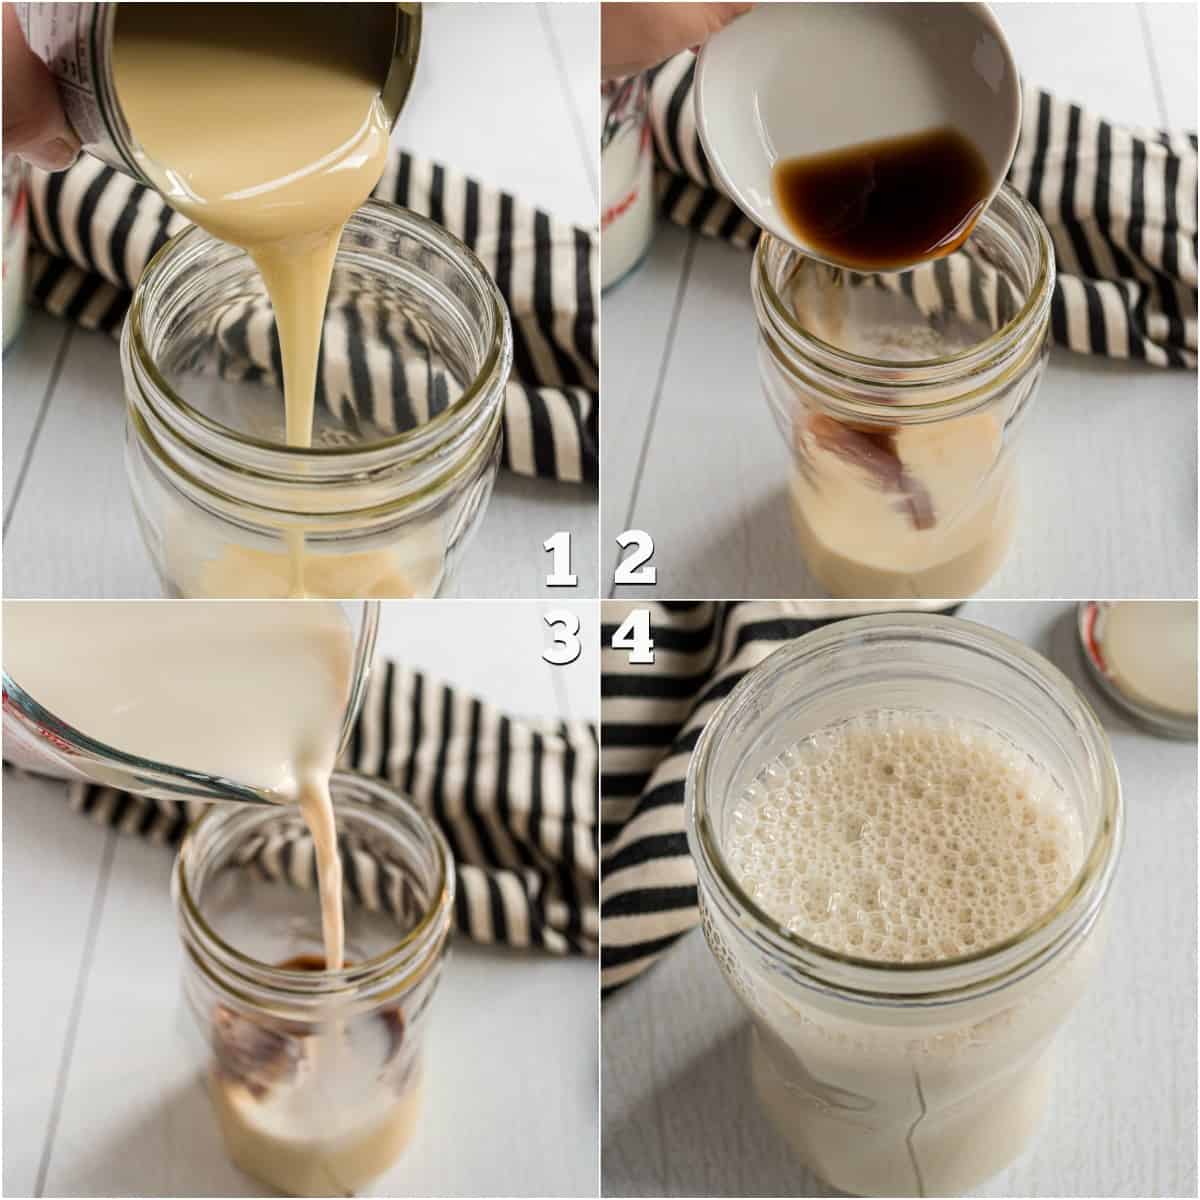 Step by step photos showing how to make french vanilla coffee creamer.